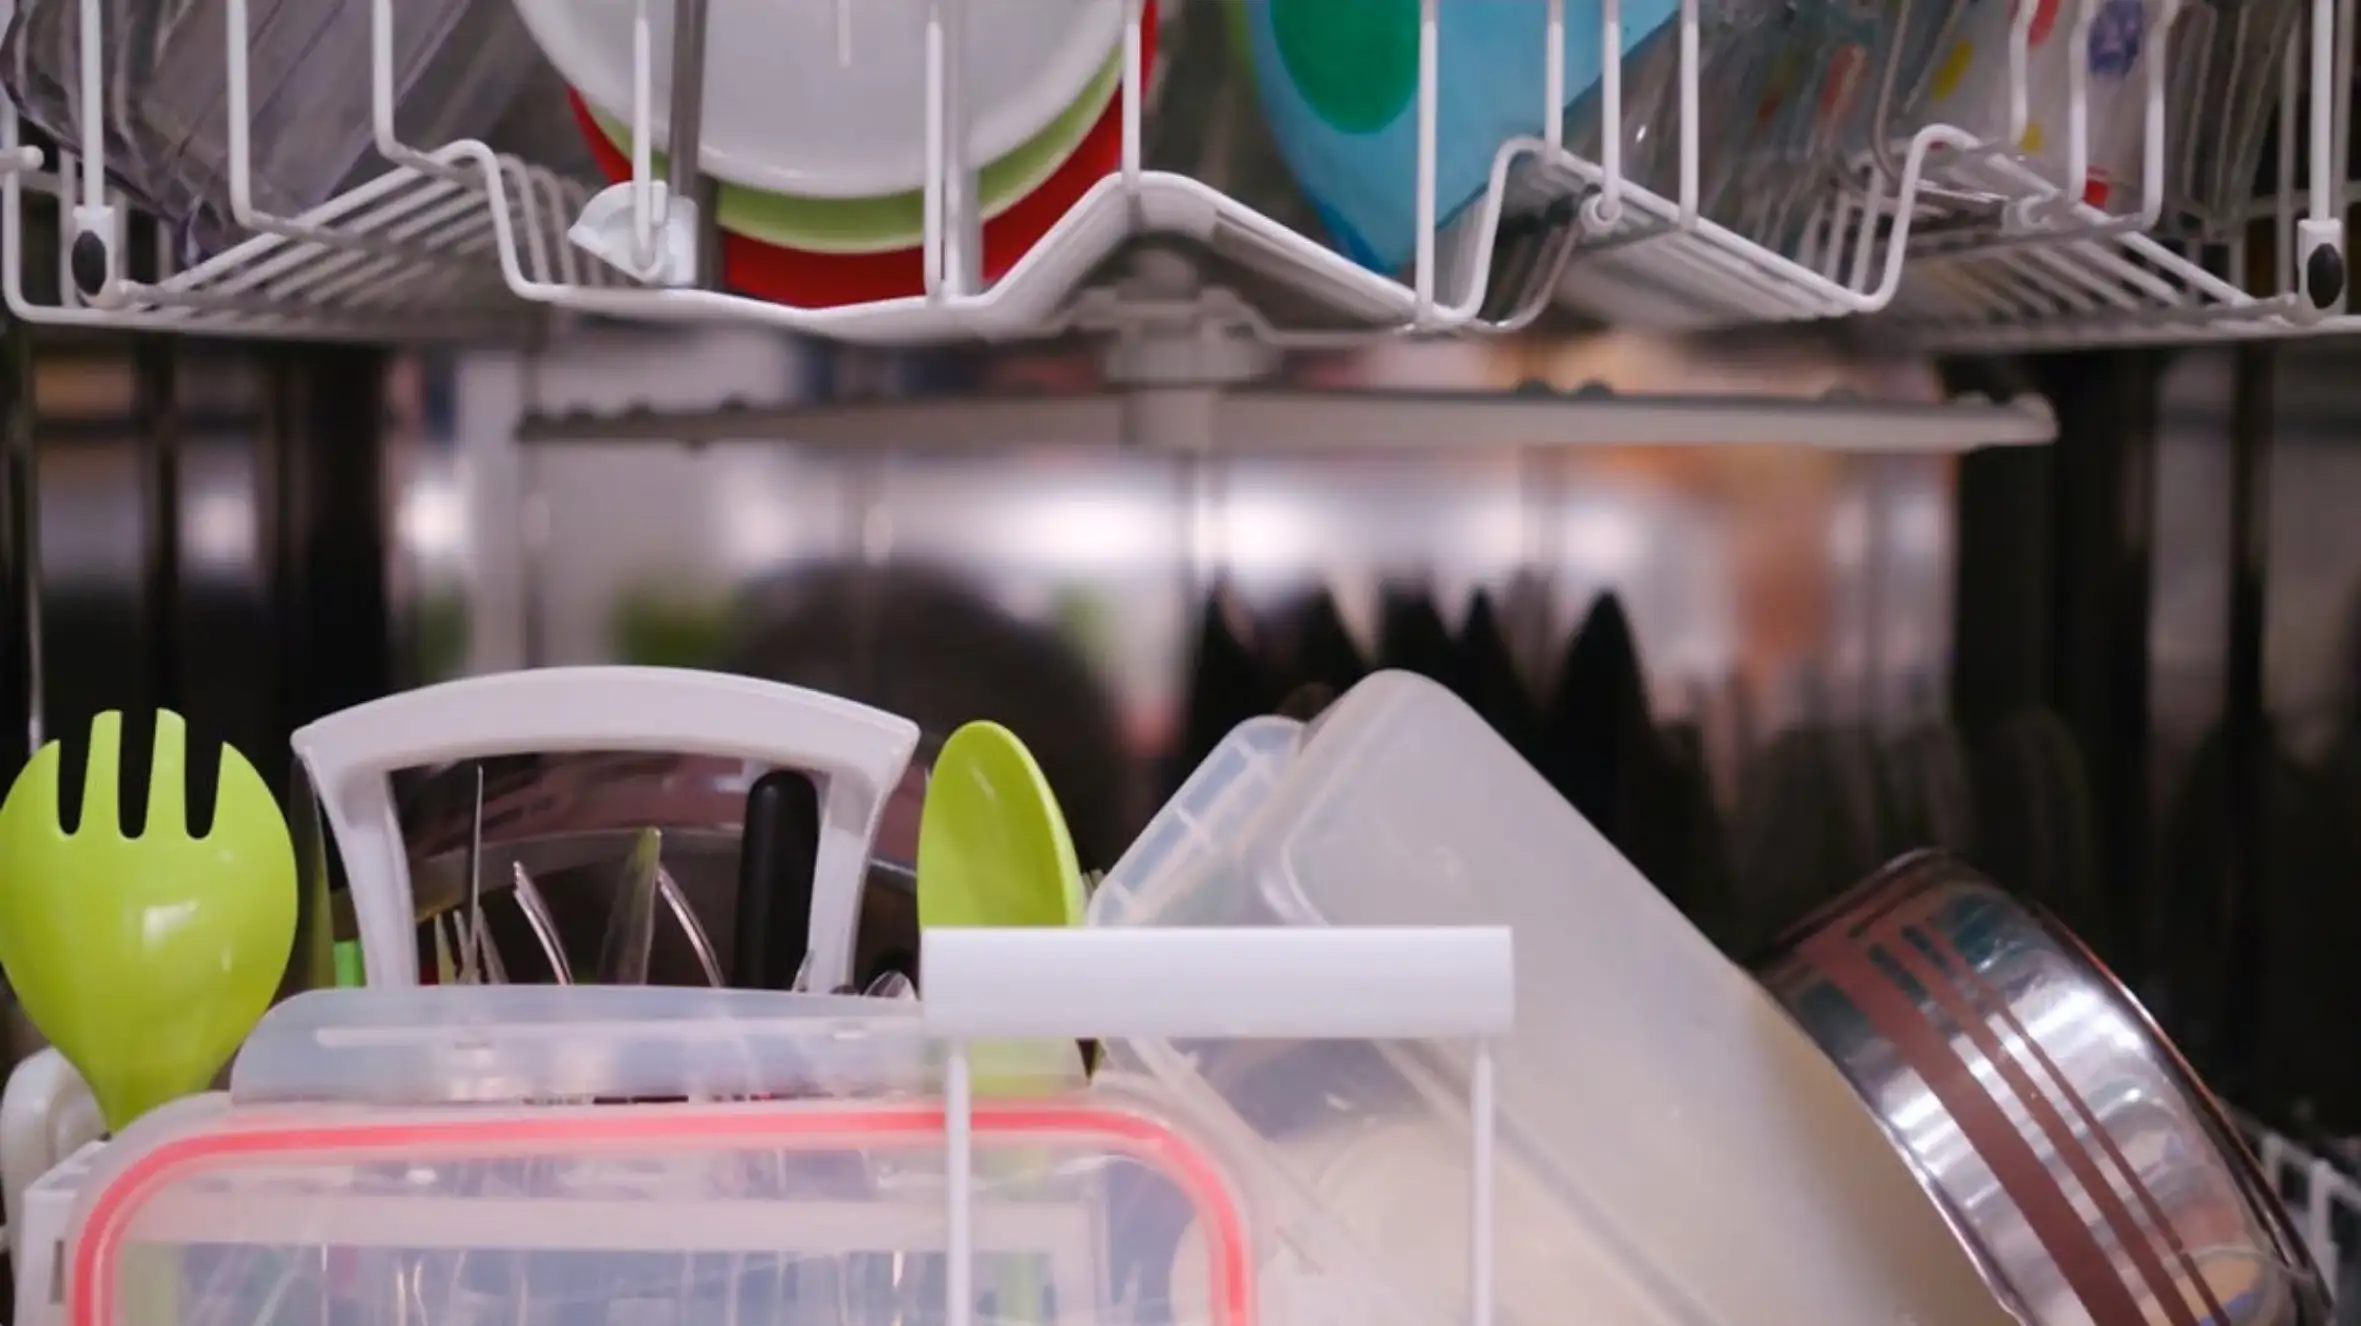 Can Mold In Dishwasher Make You Sick